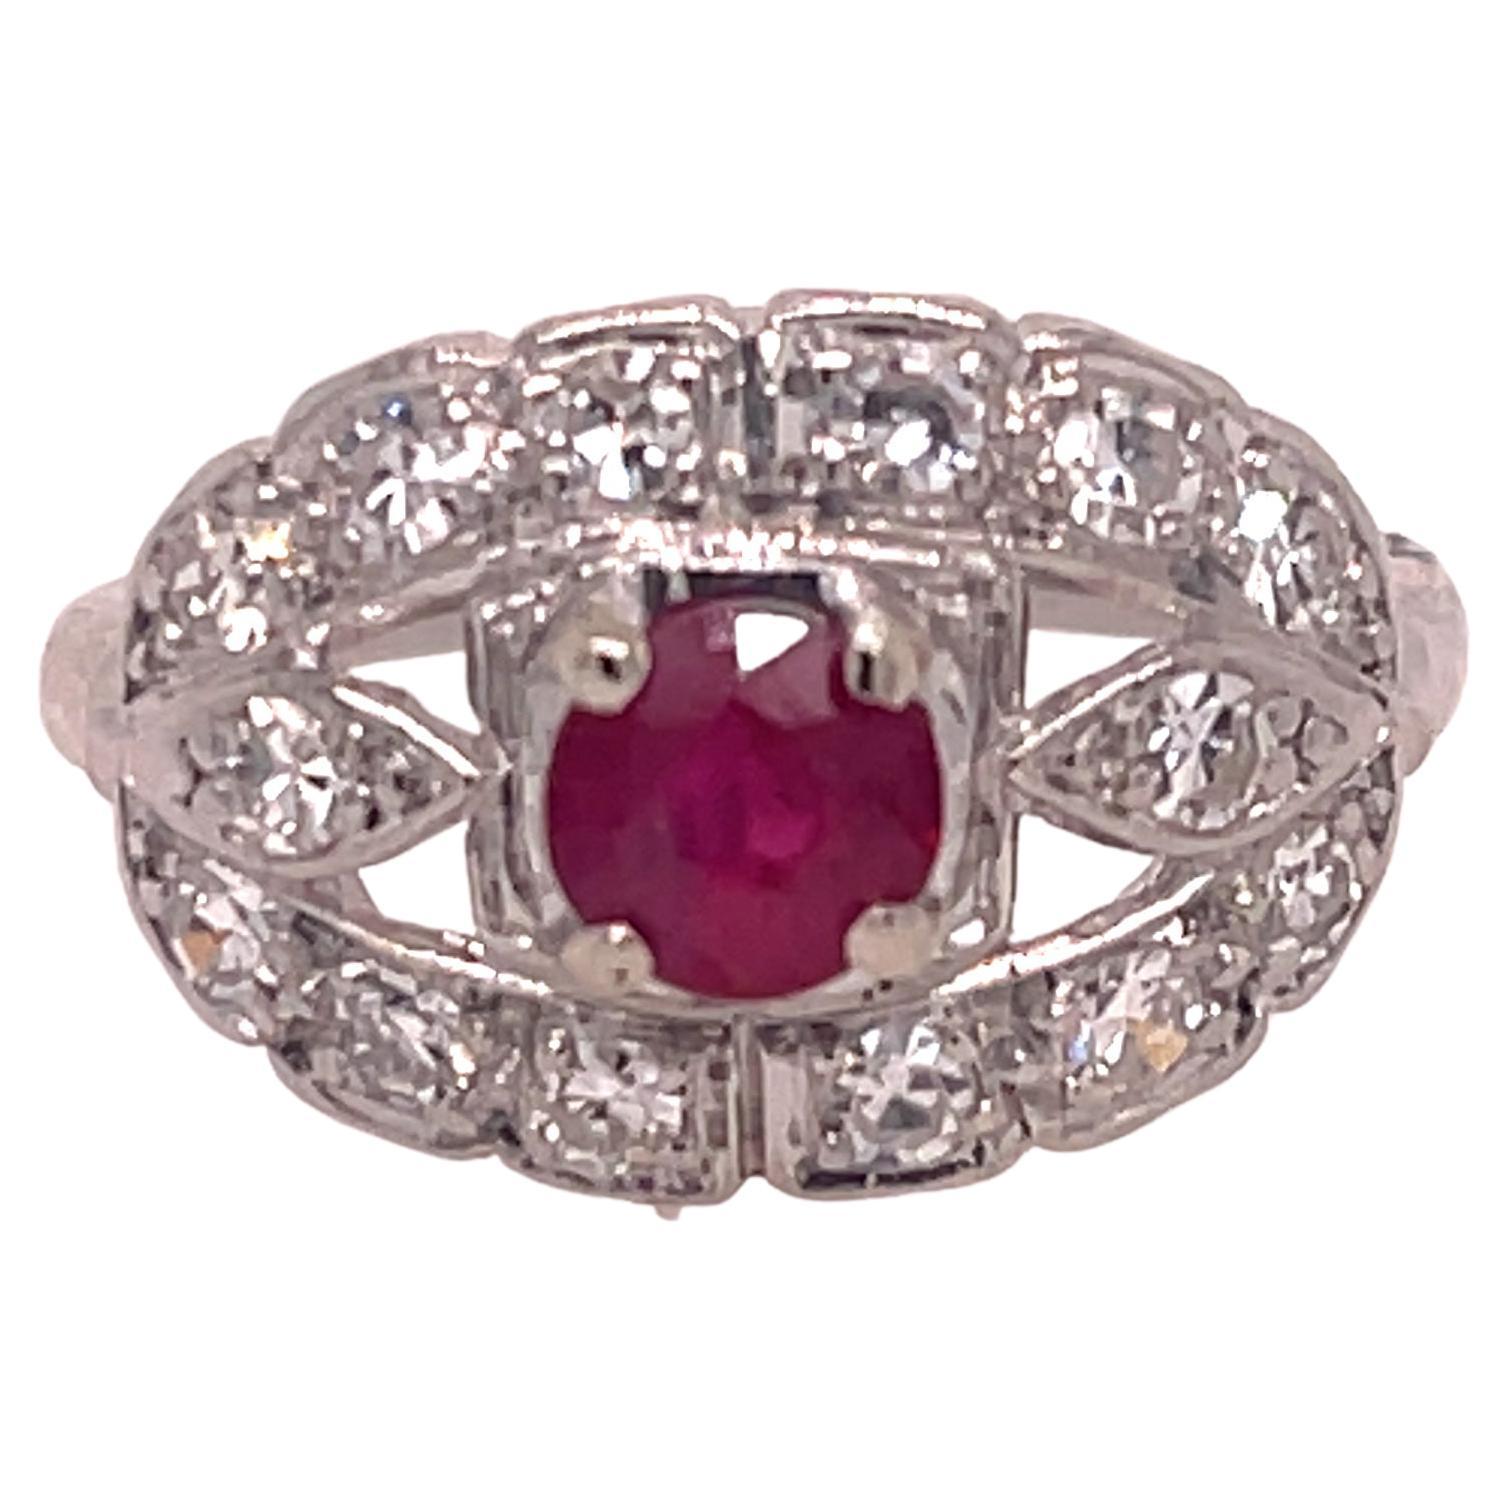 Diamond and Ruby Art Deco Ring in Platinum